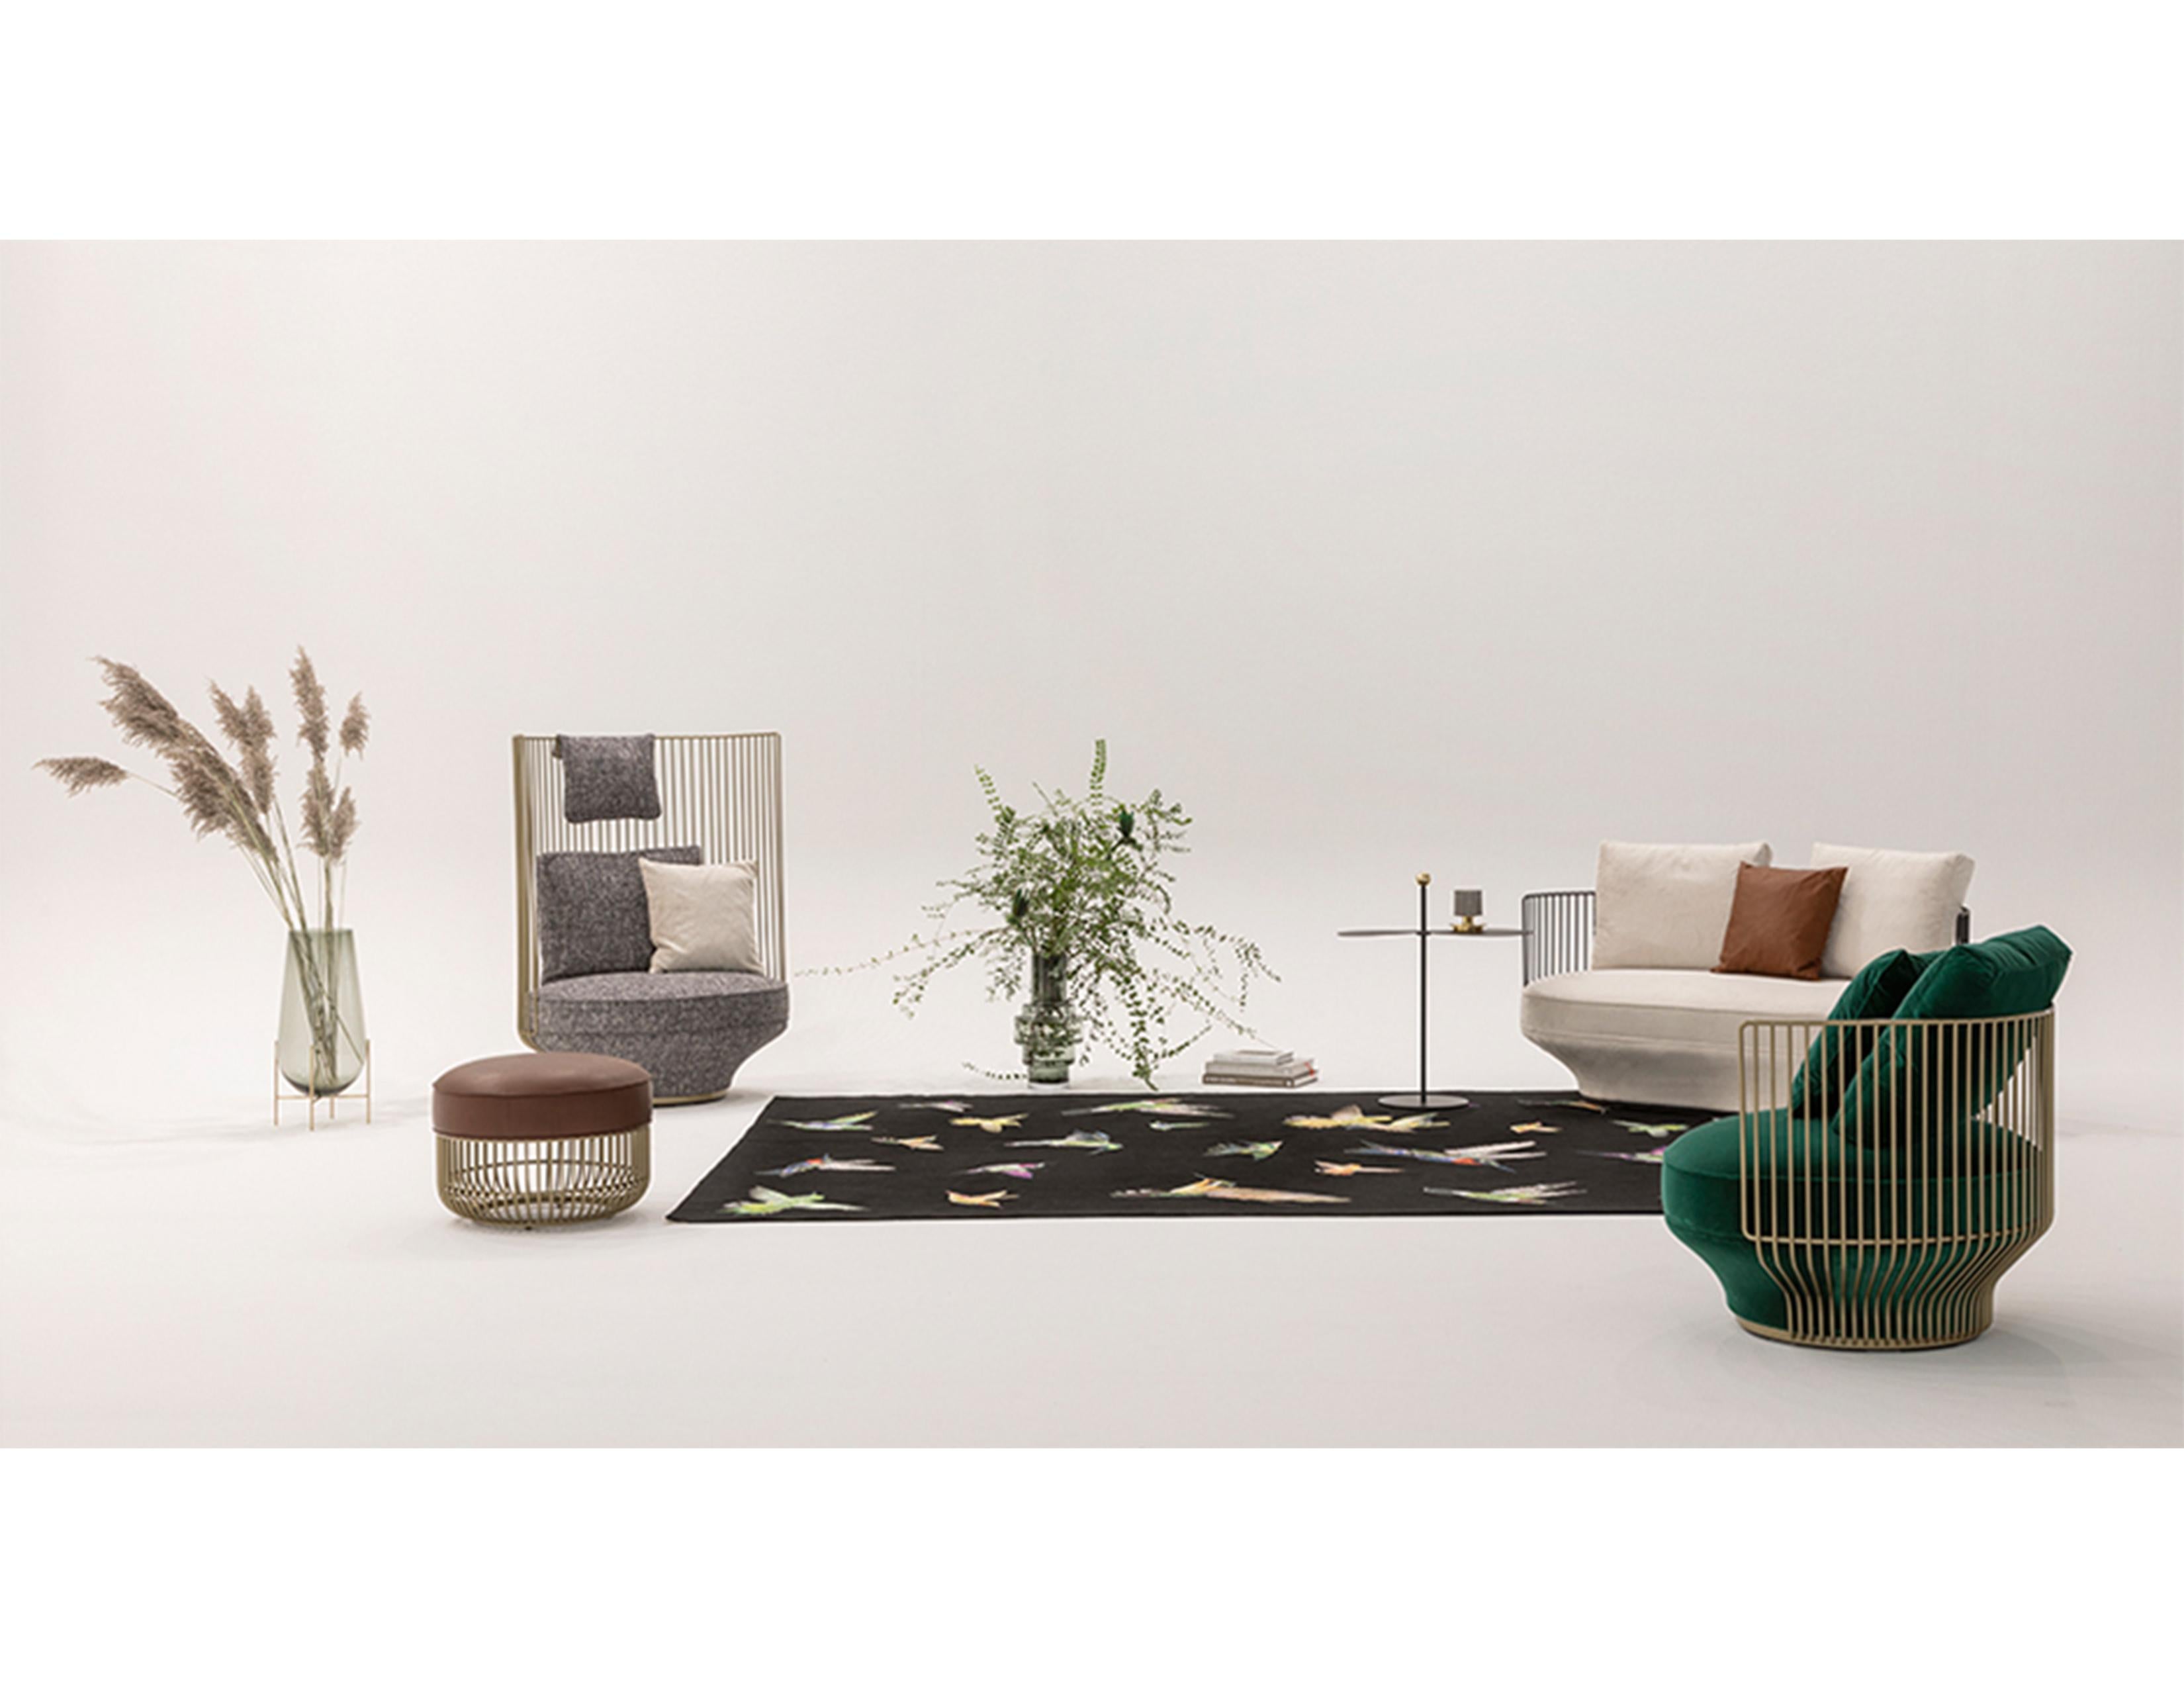 Many different upholstery materials available.
Standard: Black grey fine powder-coated
On request: Brass satin matte finish.
Standard piping.
Paradise bird is a collection of unusual pieces of furniture: it manifests an attitude to life, an